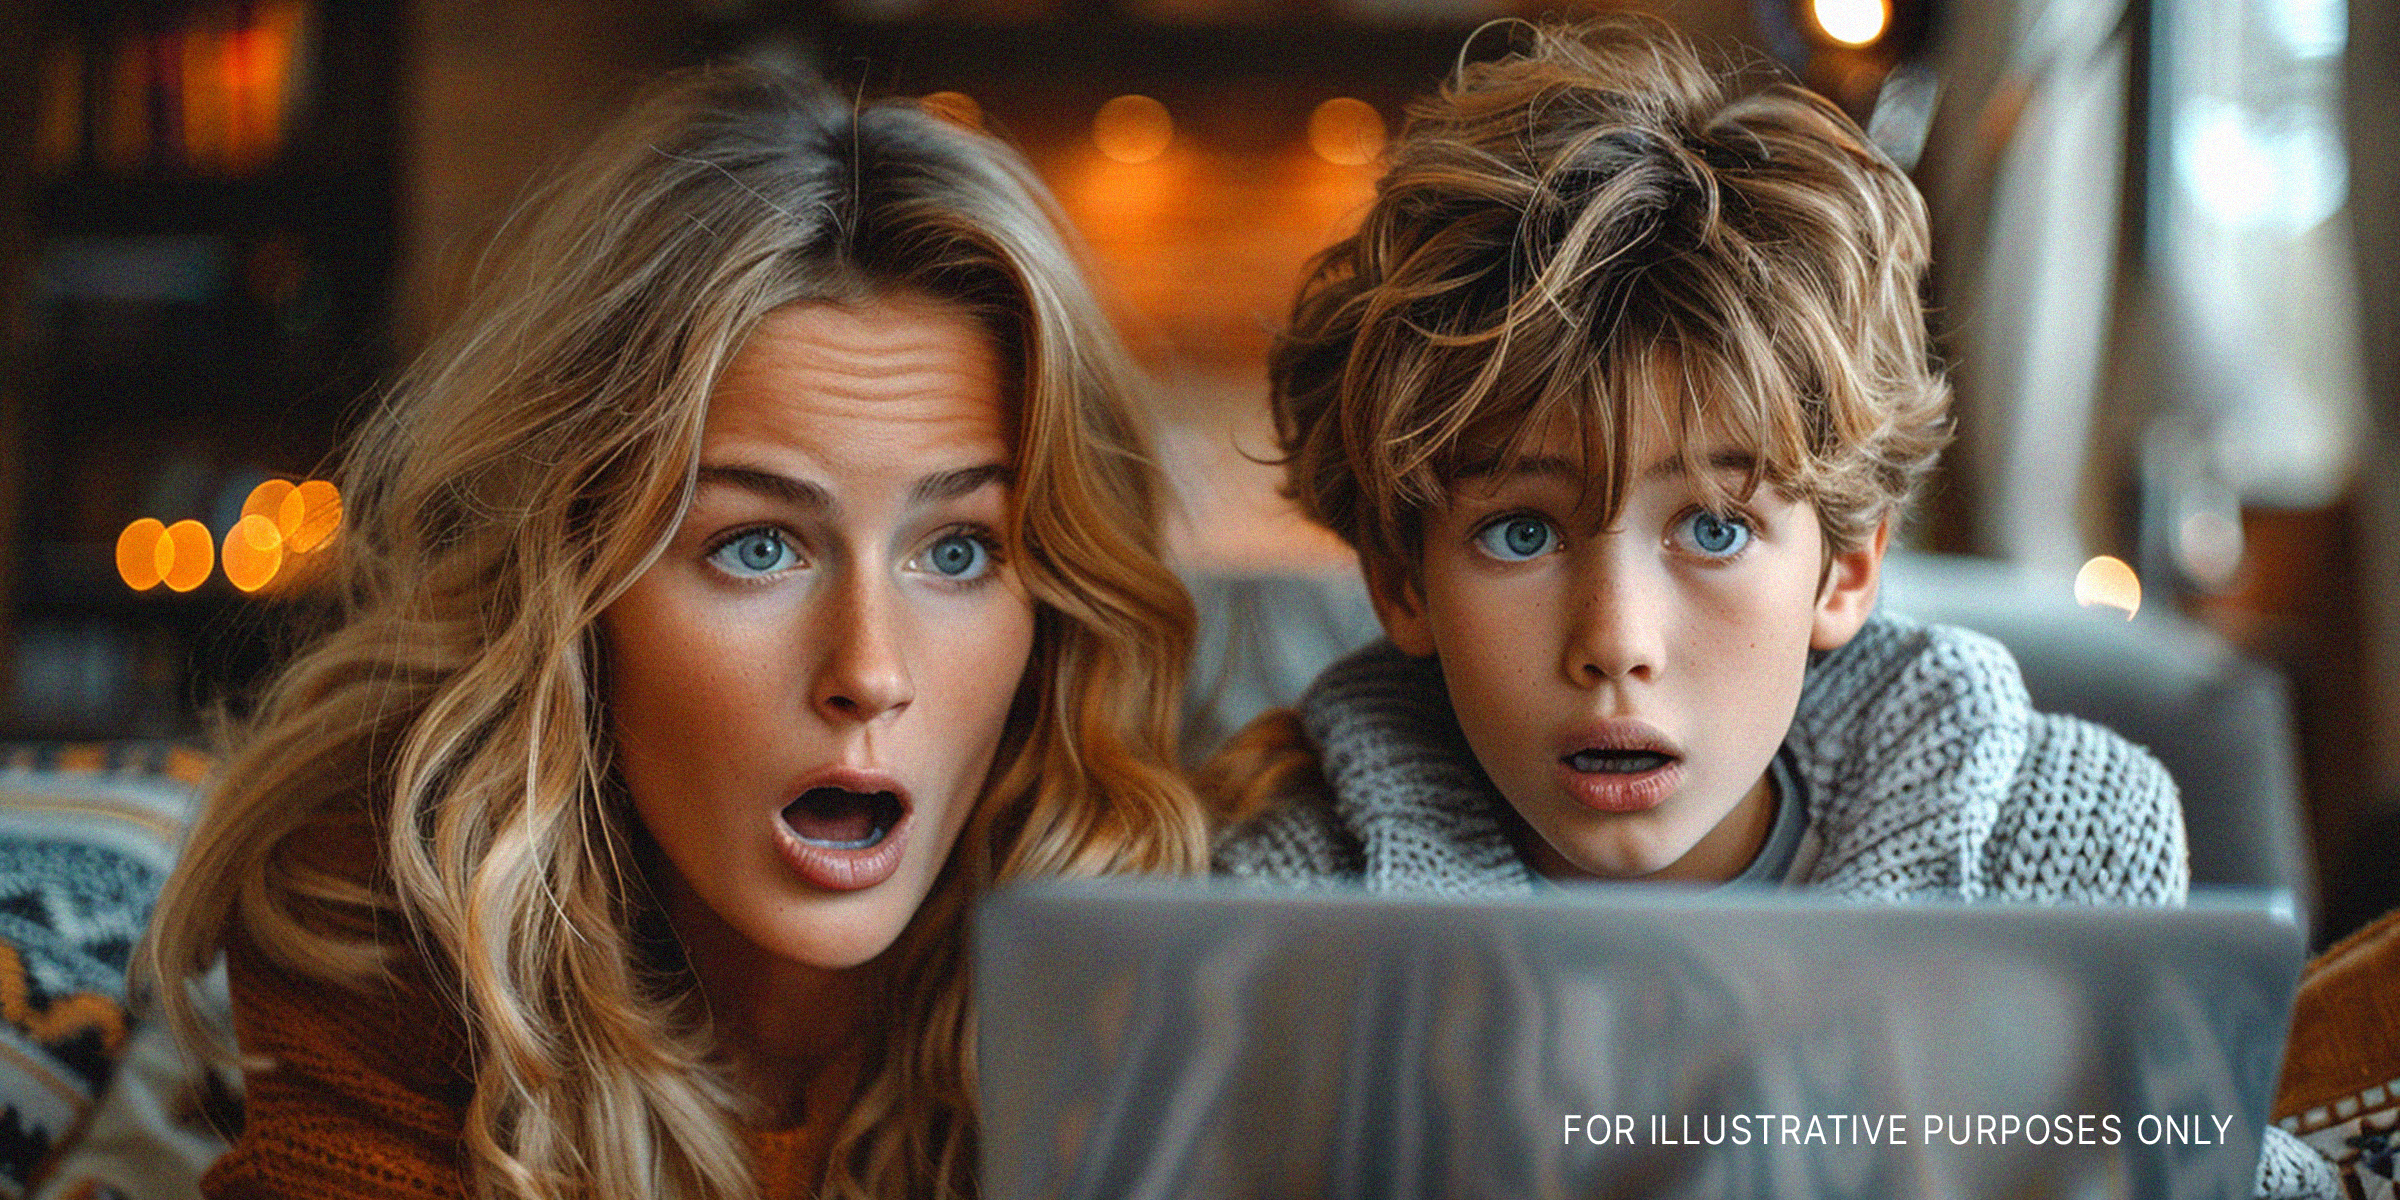 A shocked mom and son looking at a screen | Source: Midjourney